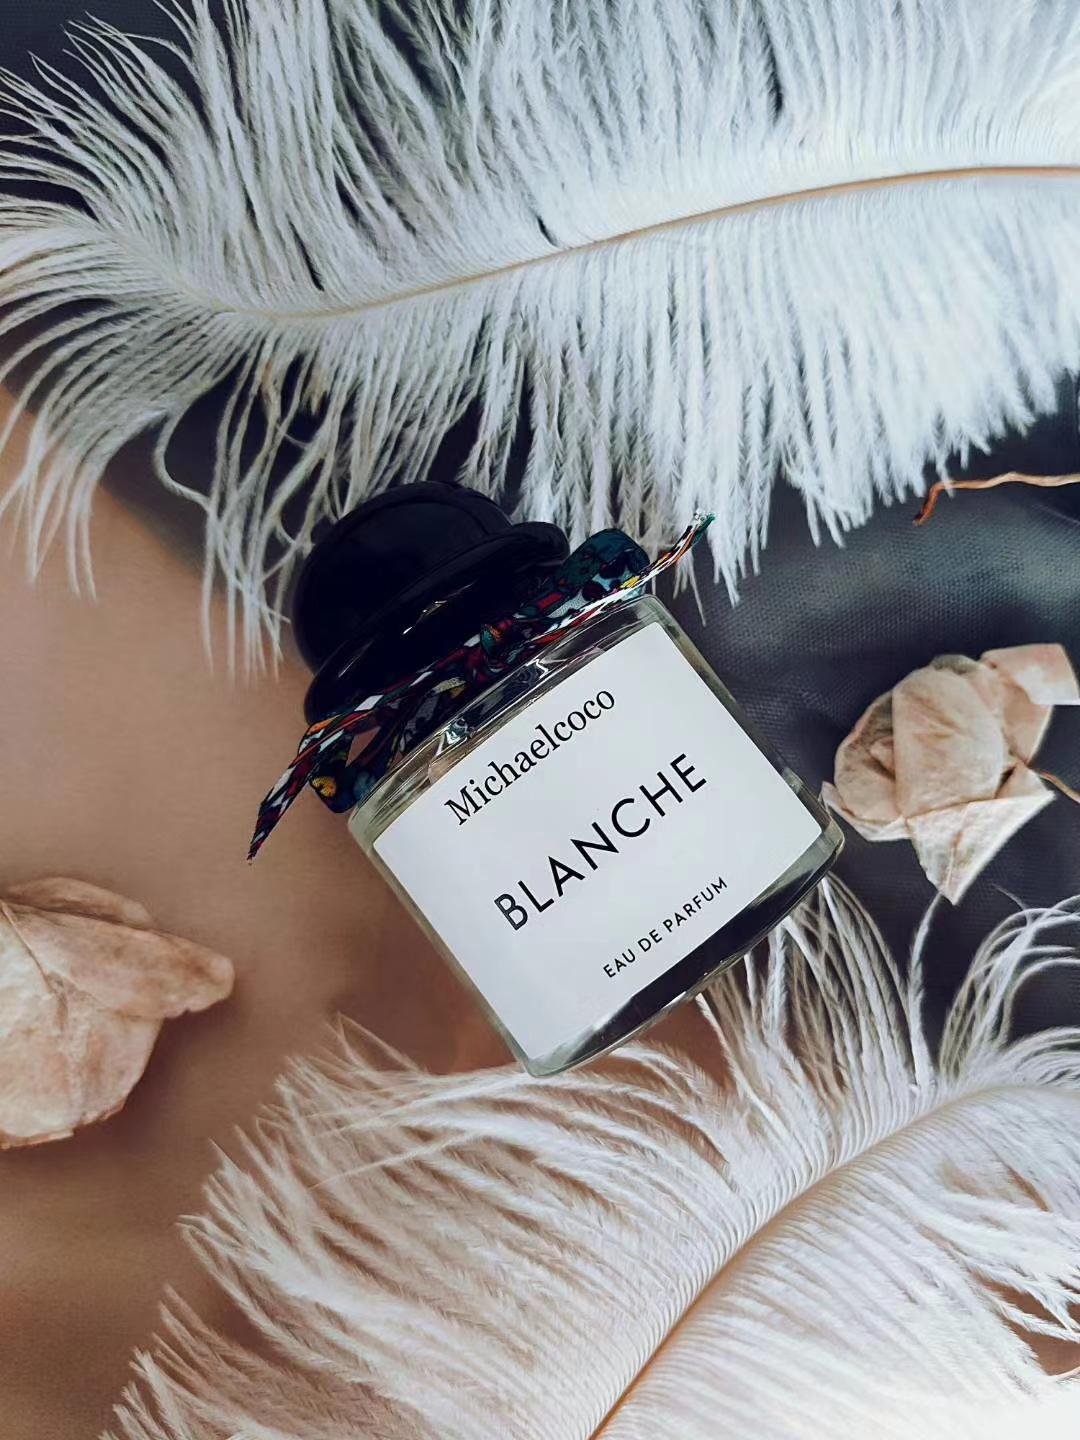 Michaelcoco Blanche 50ml with High Fragrance Oil